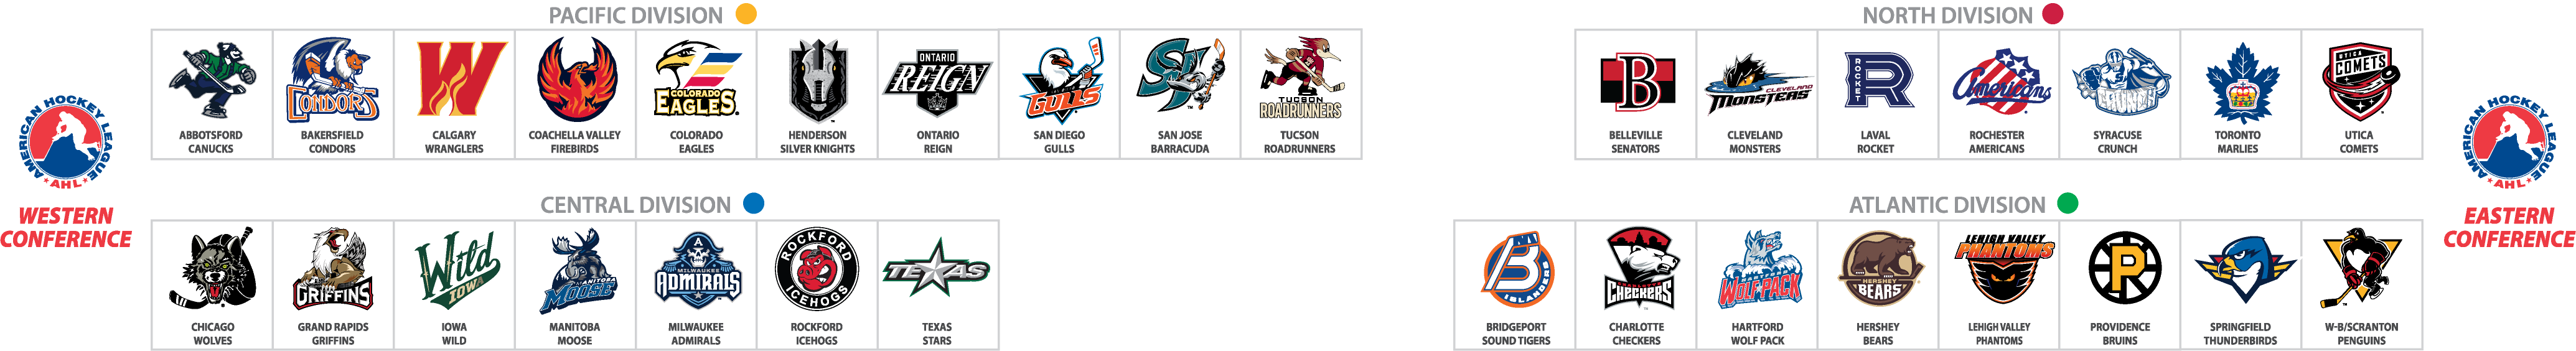 AHL-TeamAlignment.png